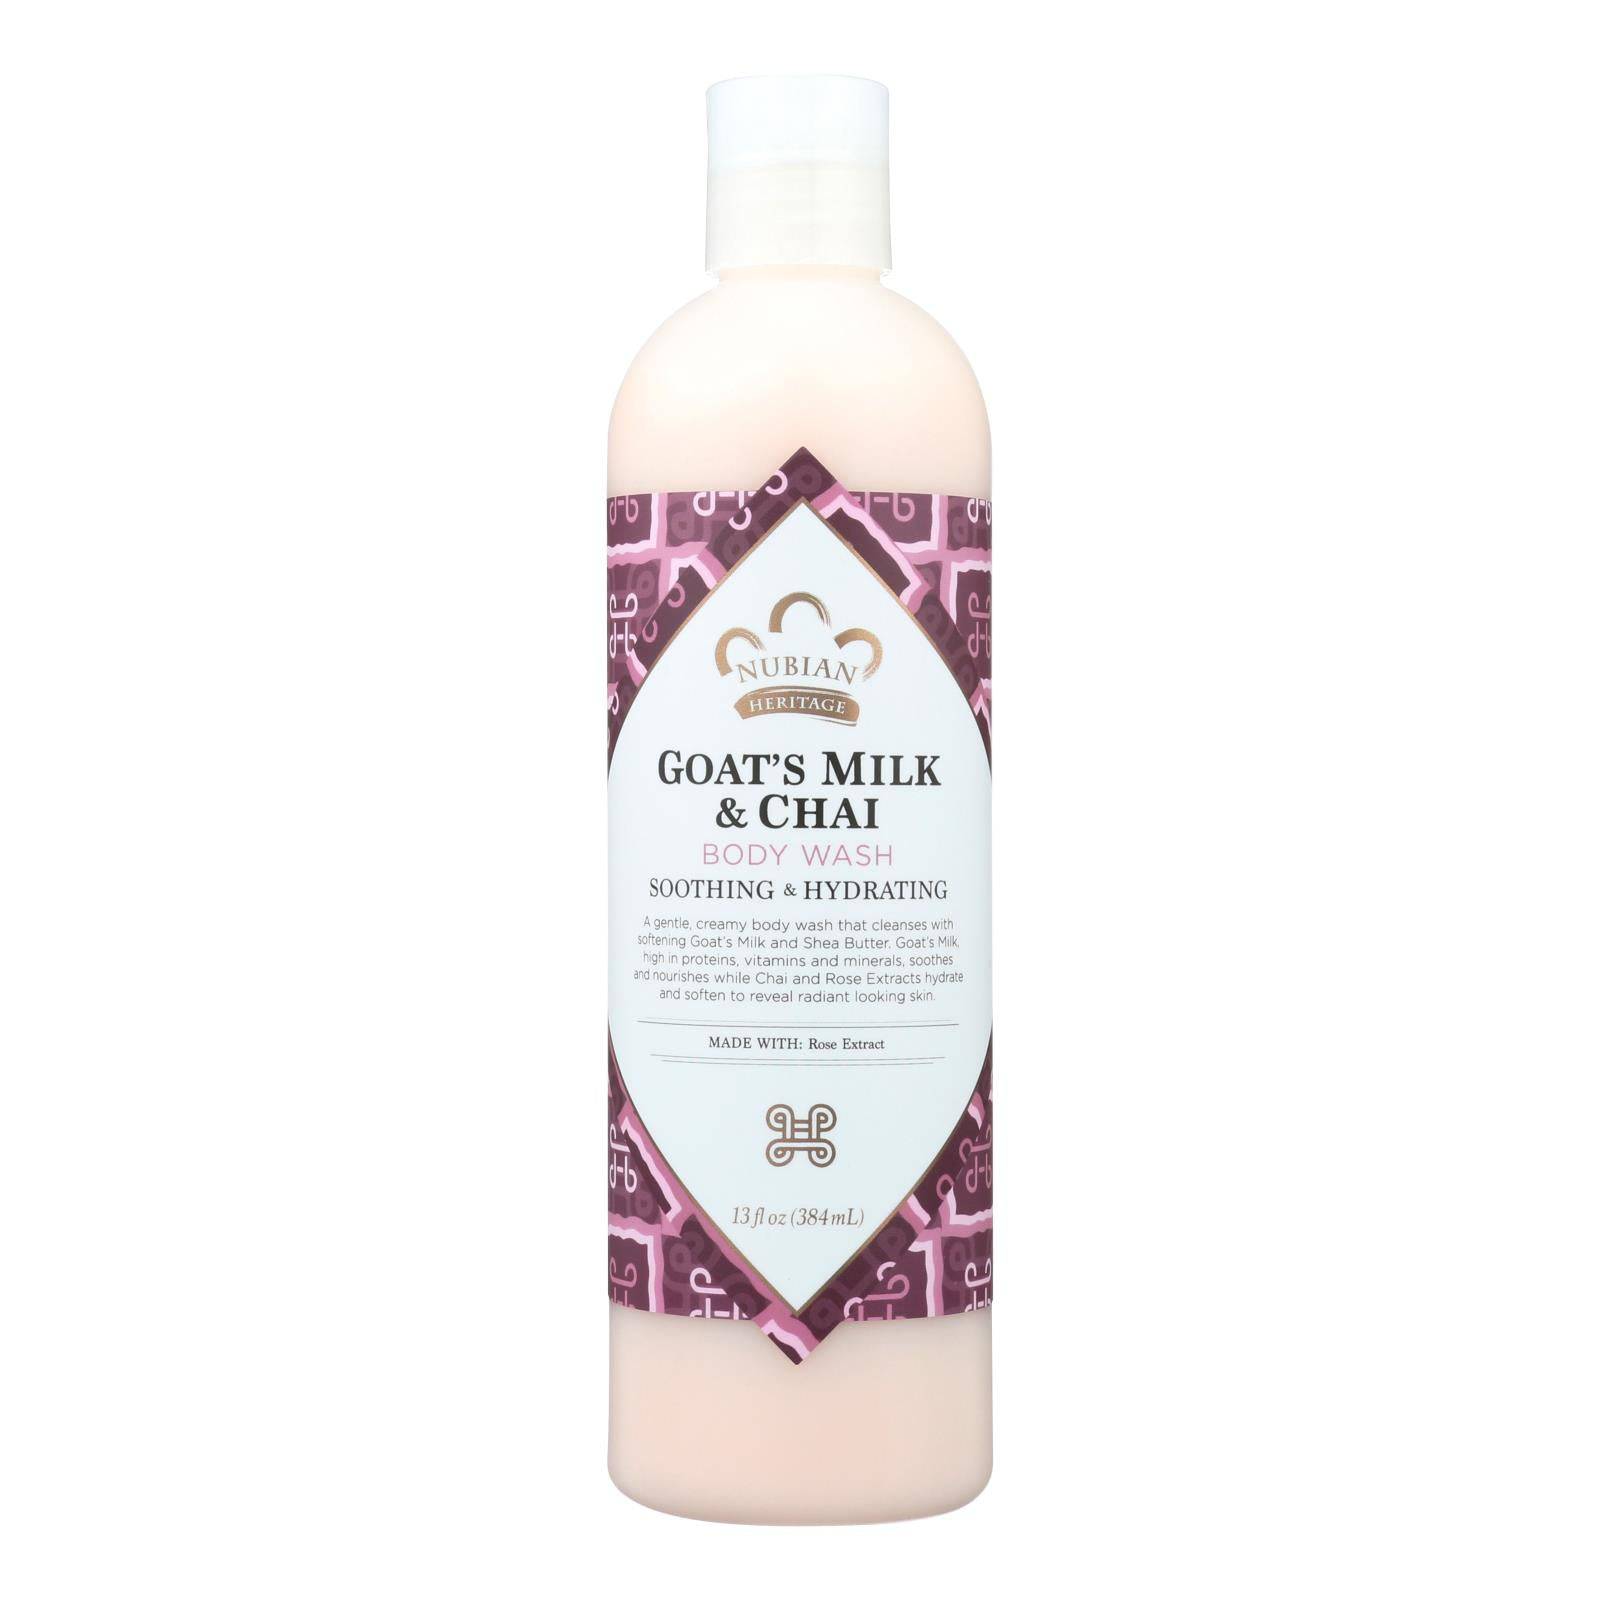 Buy Nubian Heritage Body Wash Goat's Milk And Chai - 13 Fl Oz  at OnlyNaturals.us